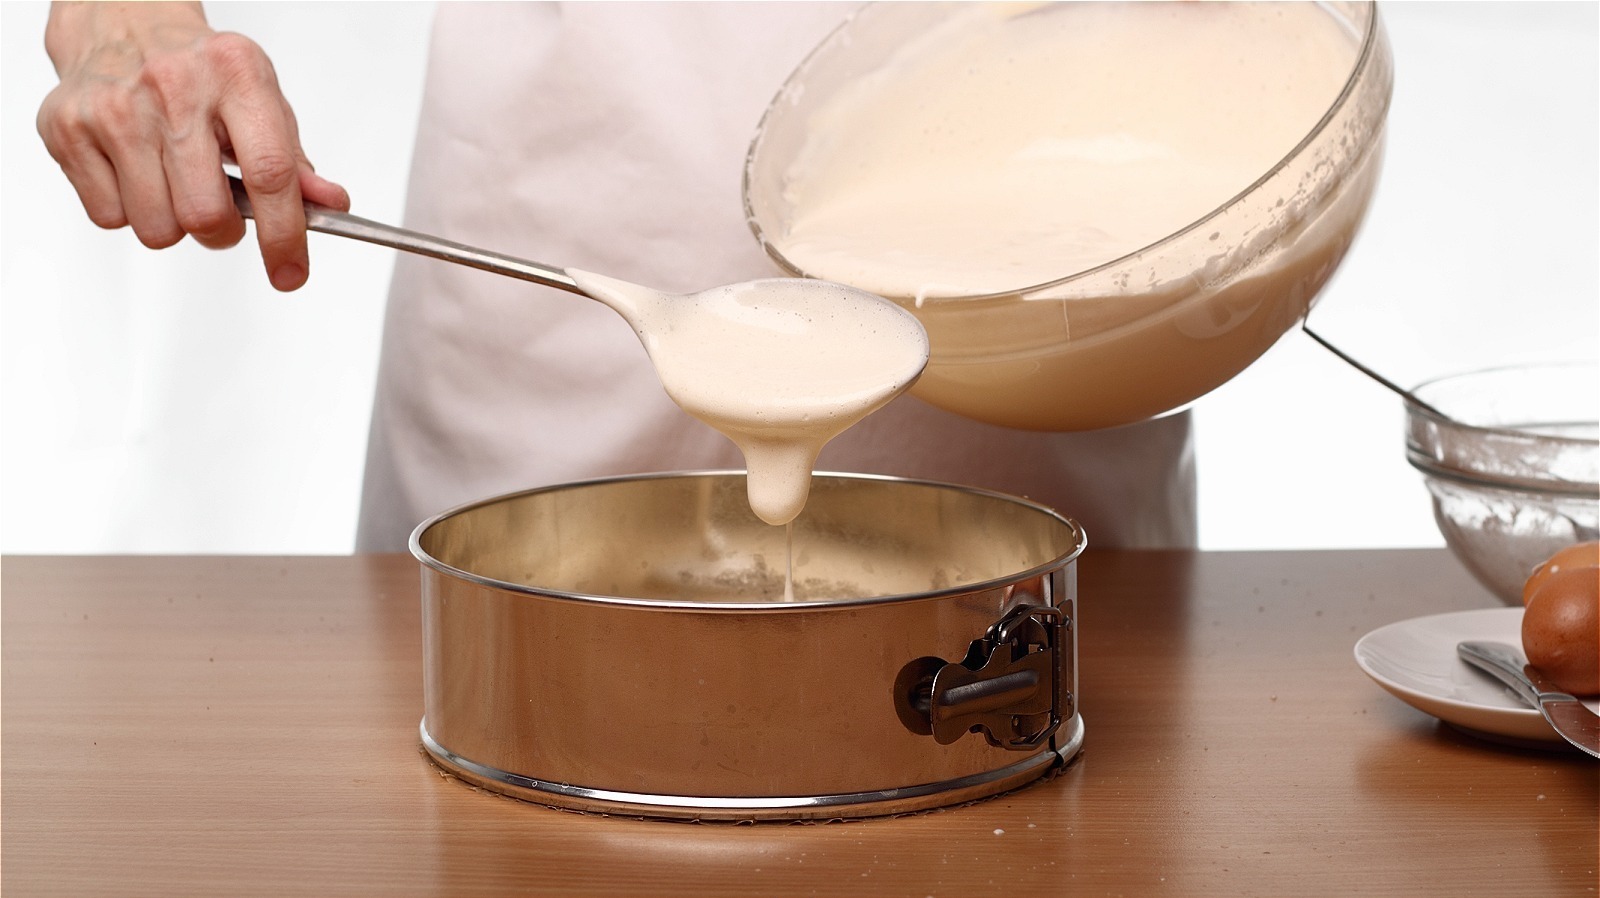 https://www.mashed.com/img/gallery/what-to-look-for-when-buying-a-quality-springform-cake-pan/l-intro-1675011238.jpg